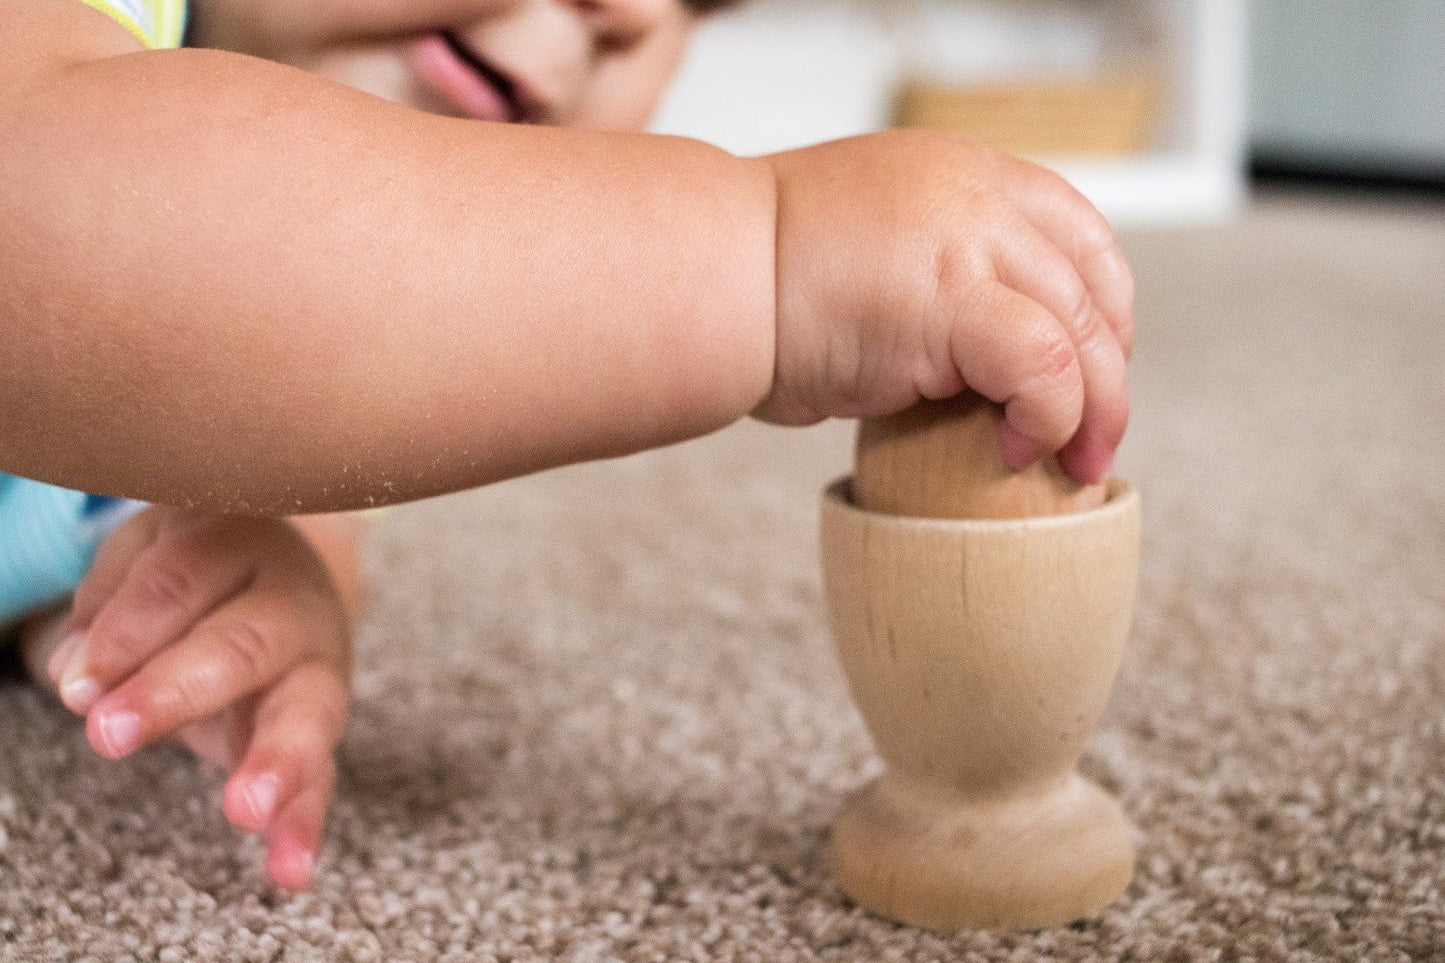 The Egg and Cup Handmade Montessori Object - Wood Wood Toys Canada's Favourite Montessori Toy Store